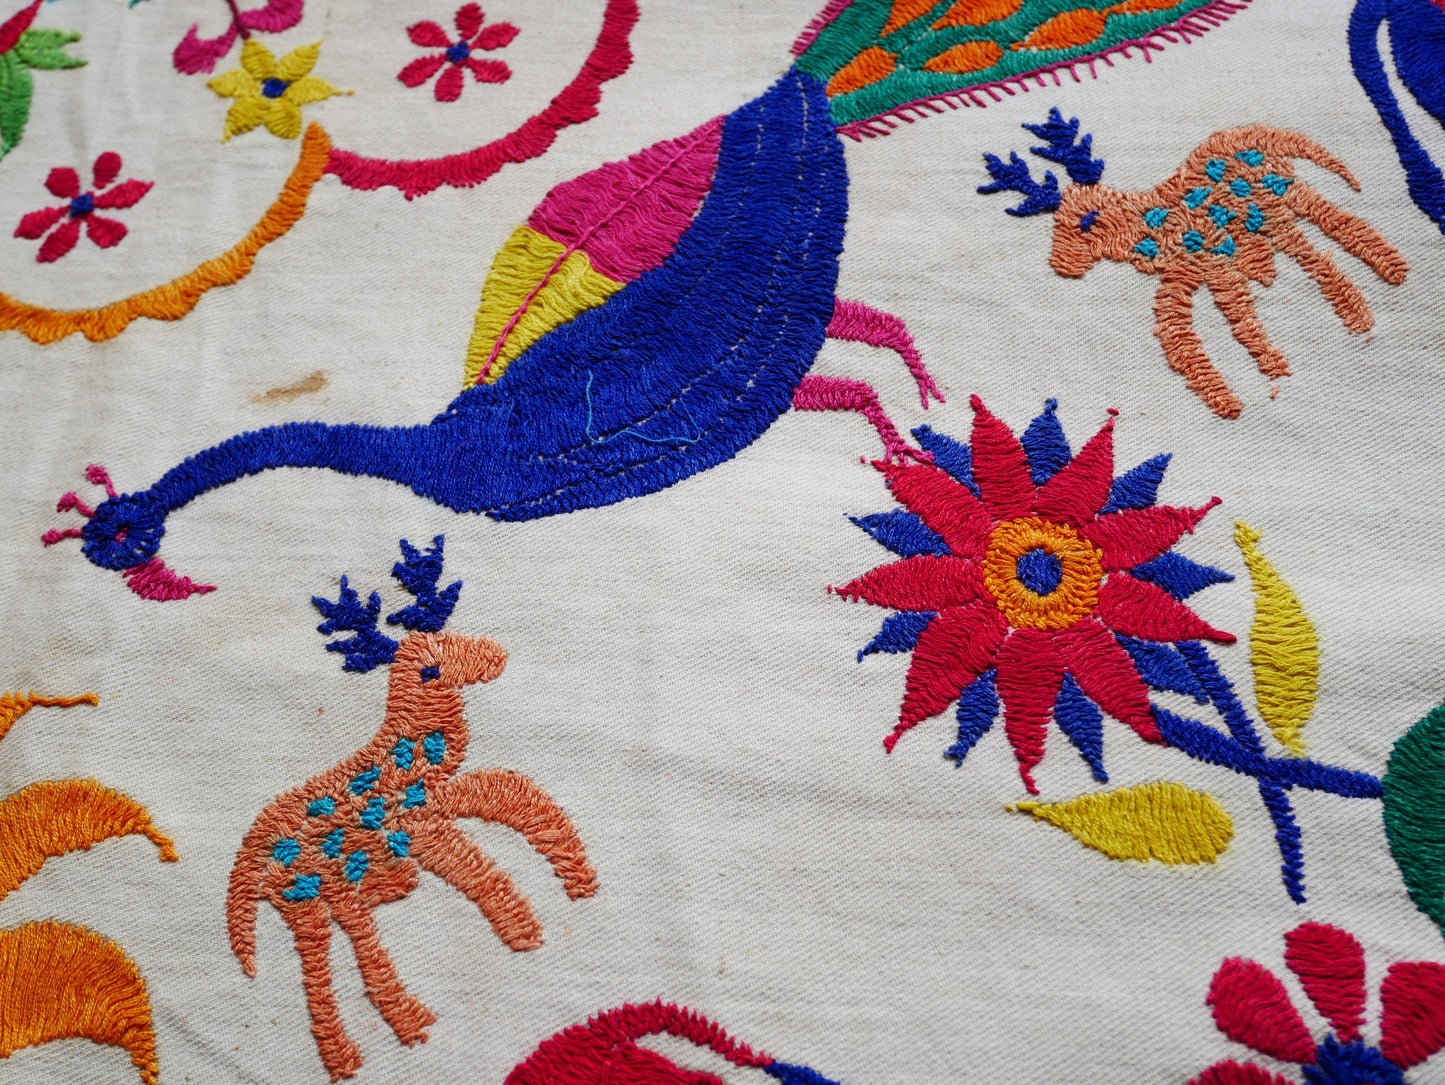 Authentic vintage wedding decor - boho bedding - Indian ceiling decor, wall hanging or bed throw- Banjara embroidery